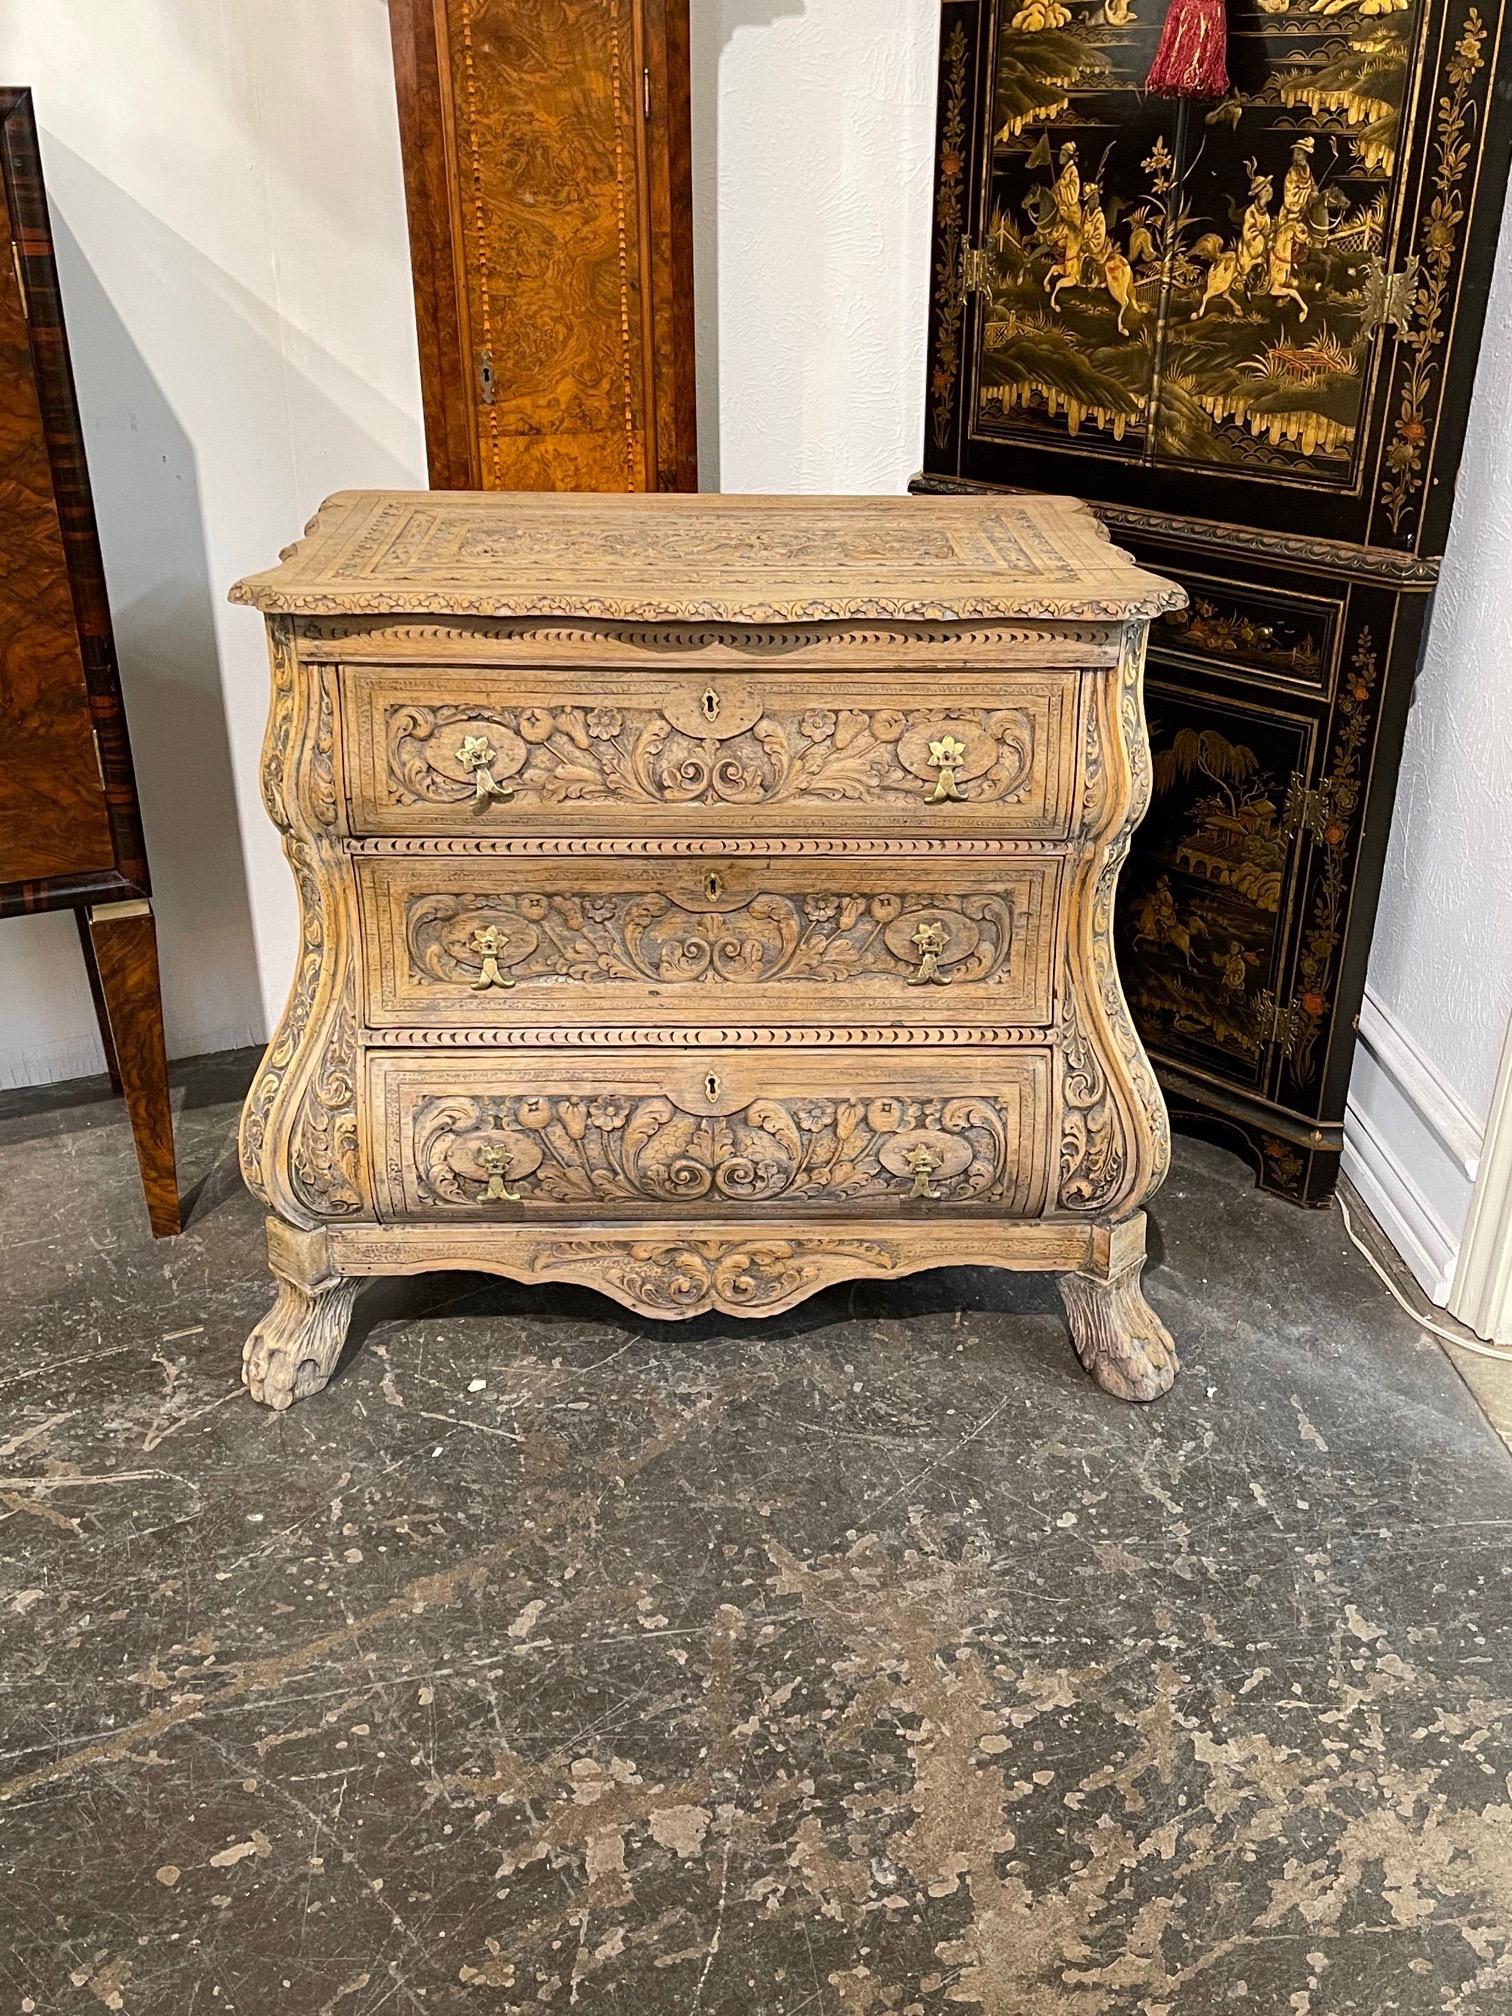 Handsome early 20th century Dutch carved and bleached oak commode. Very intricate carving and nice patina as well. A truly unique piece!